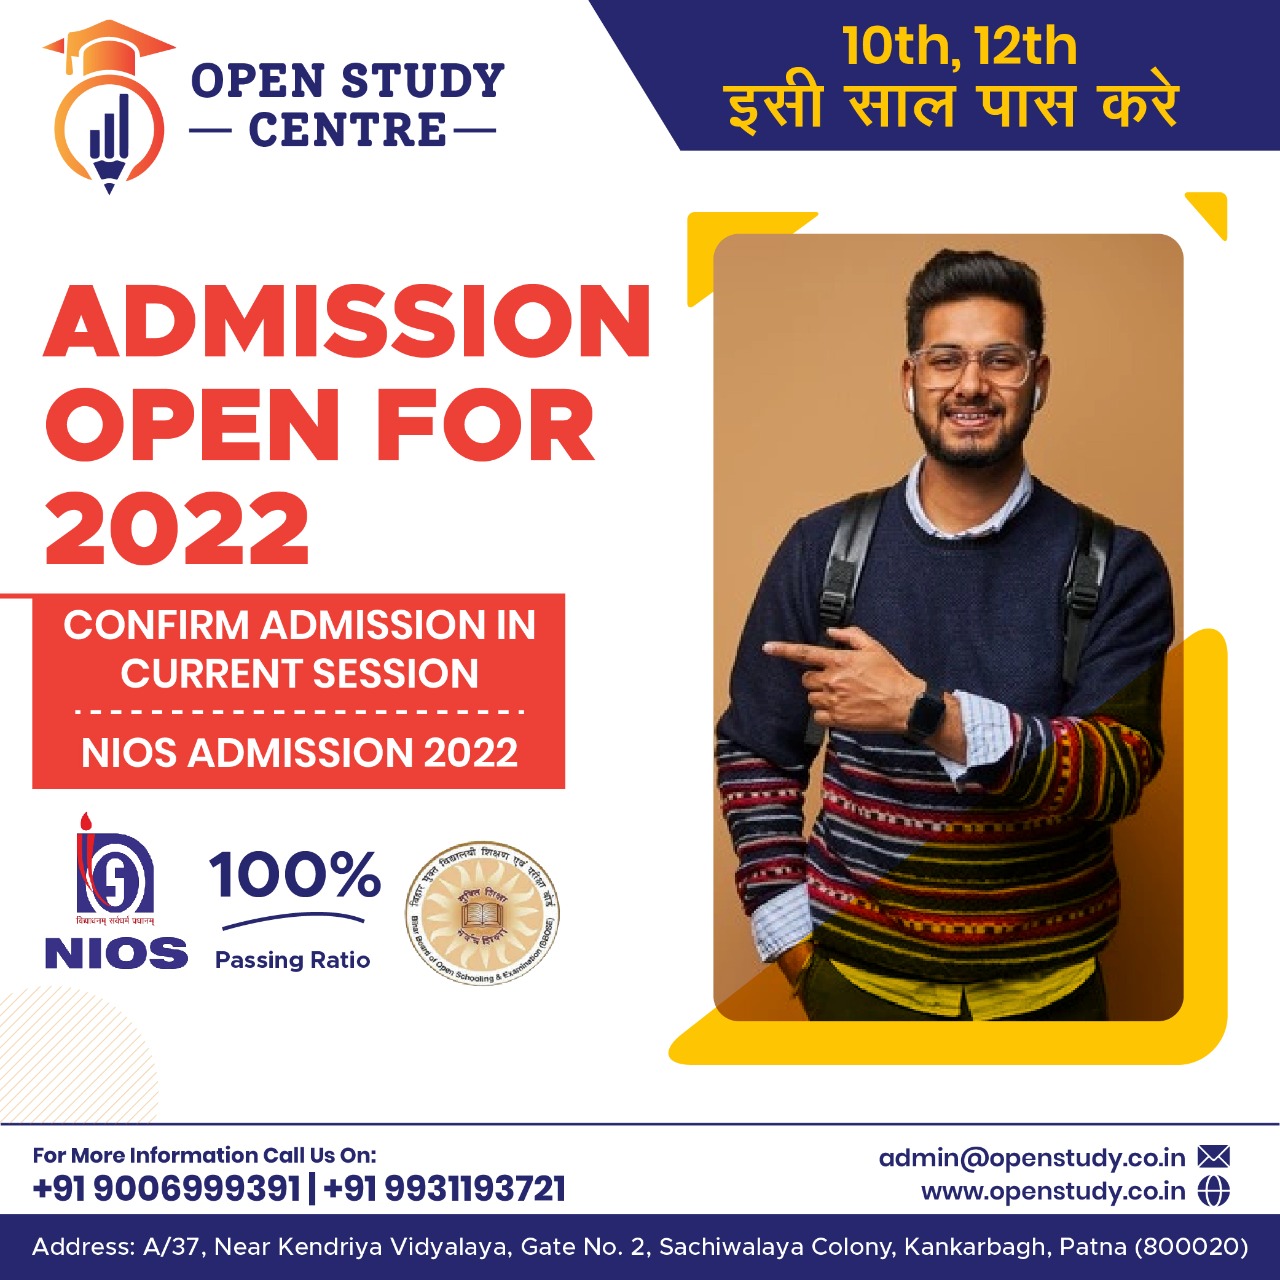 All About NIOS Last Date of Admission in 2022